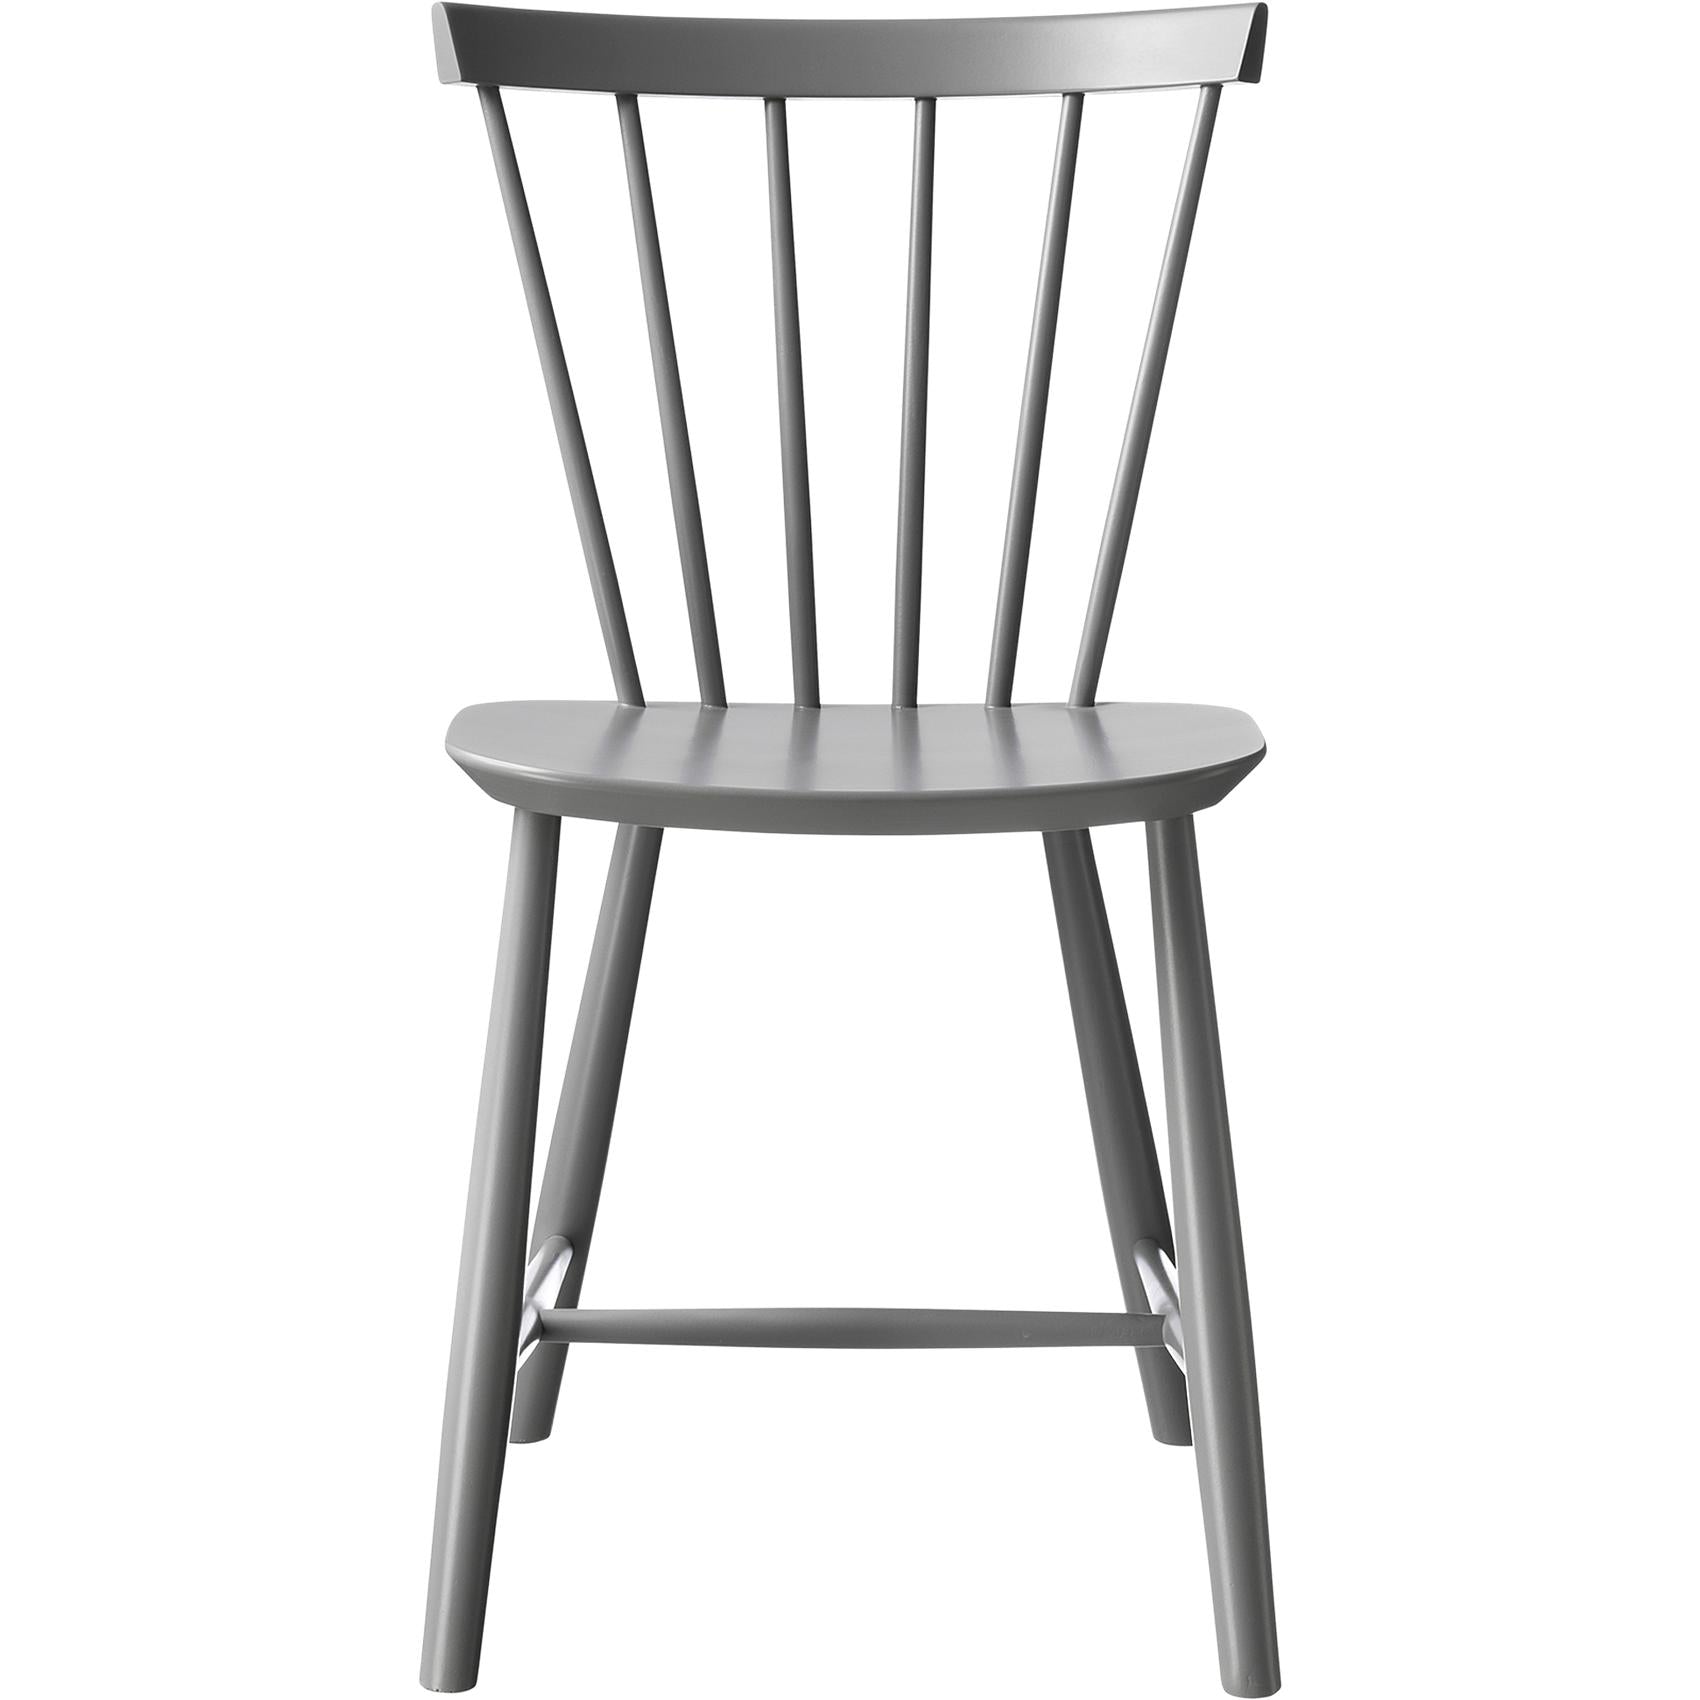 Fdb Møbler Poul Volther J46 Dining Chair Beech, Grey, H 80cm